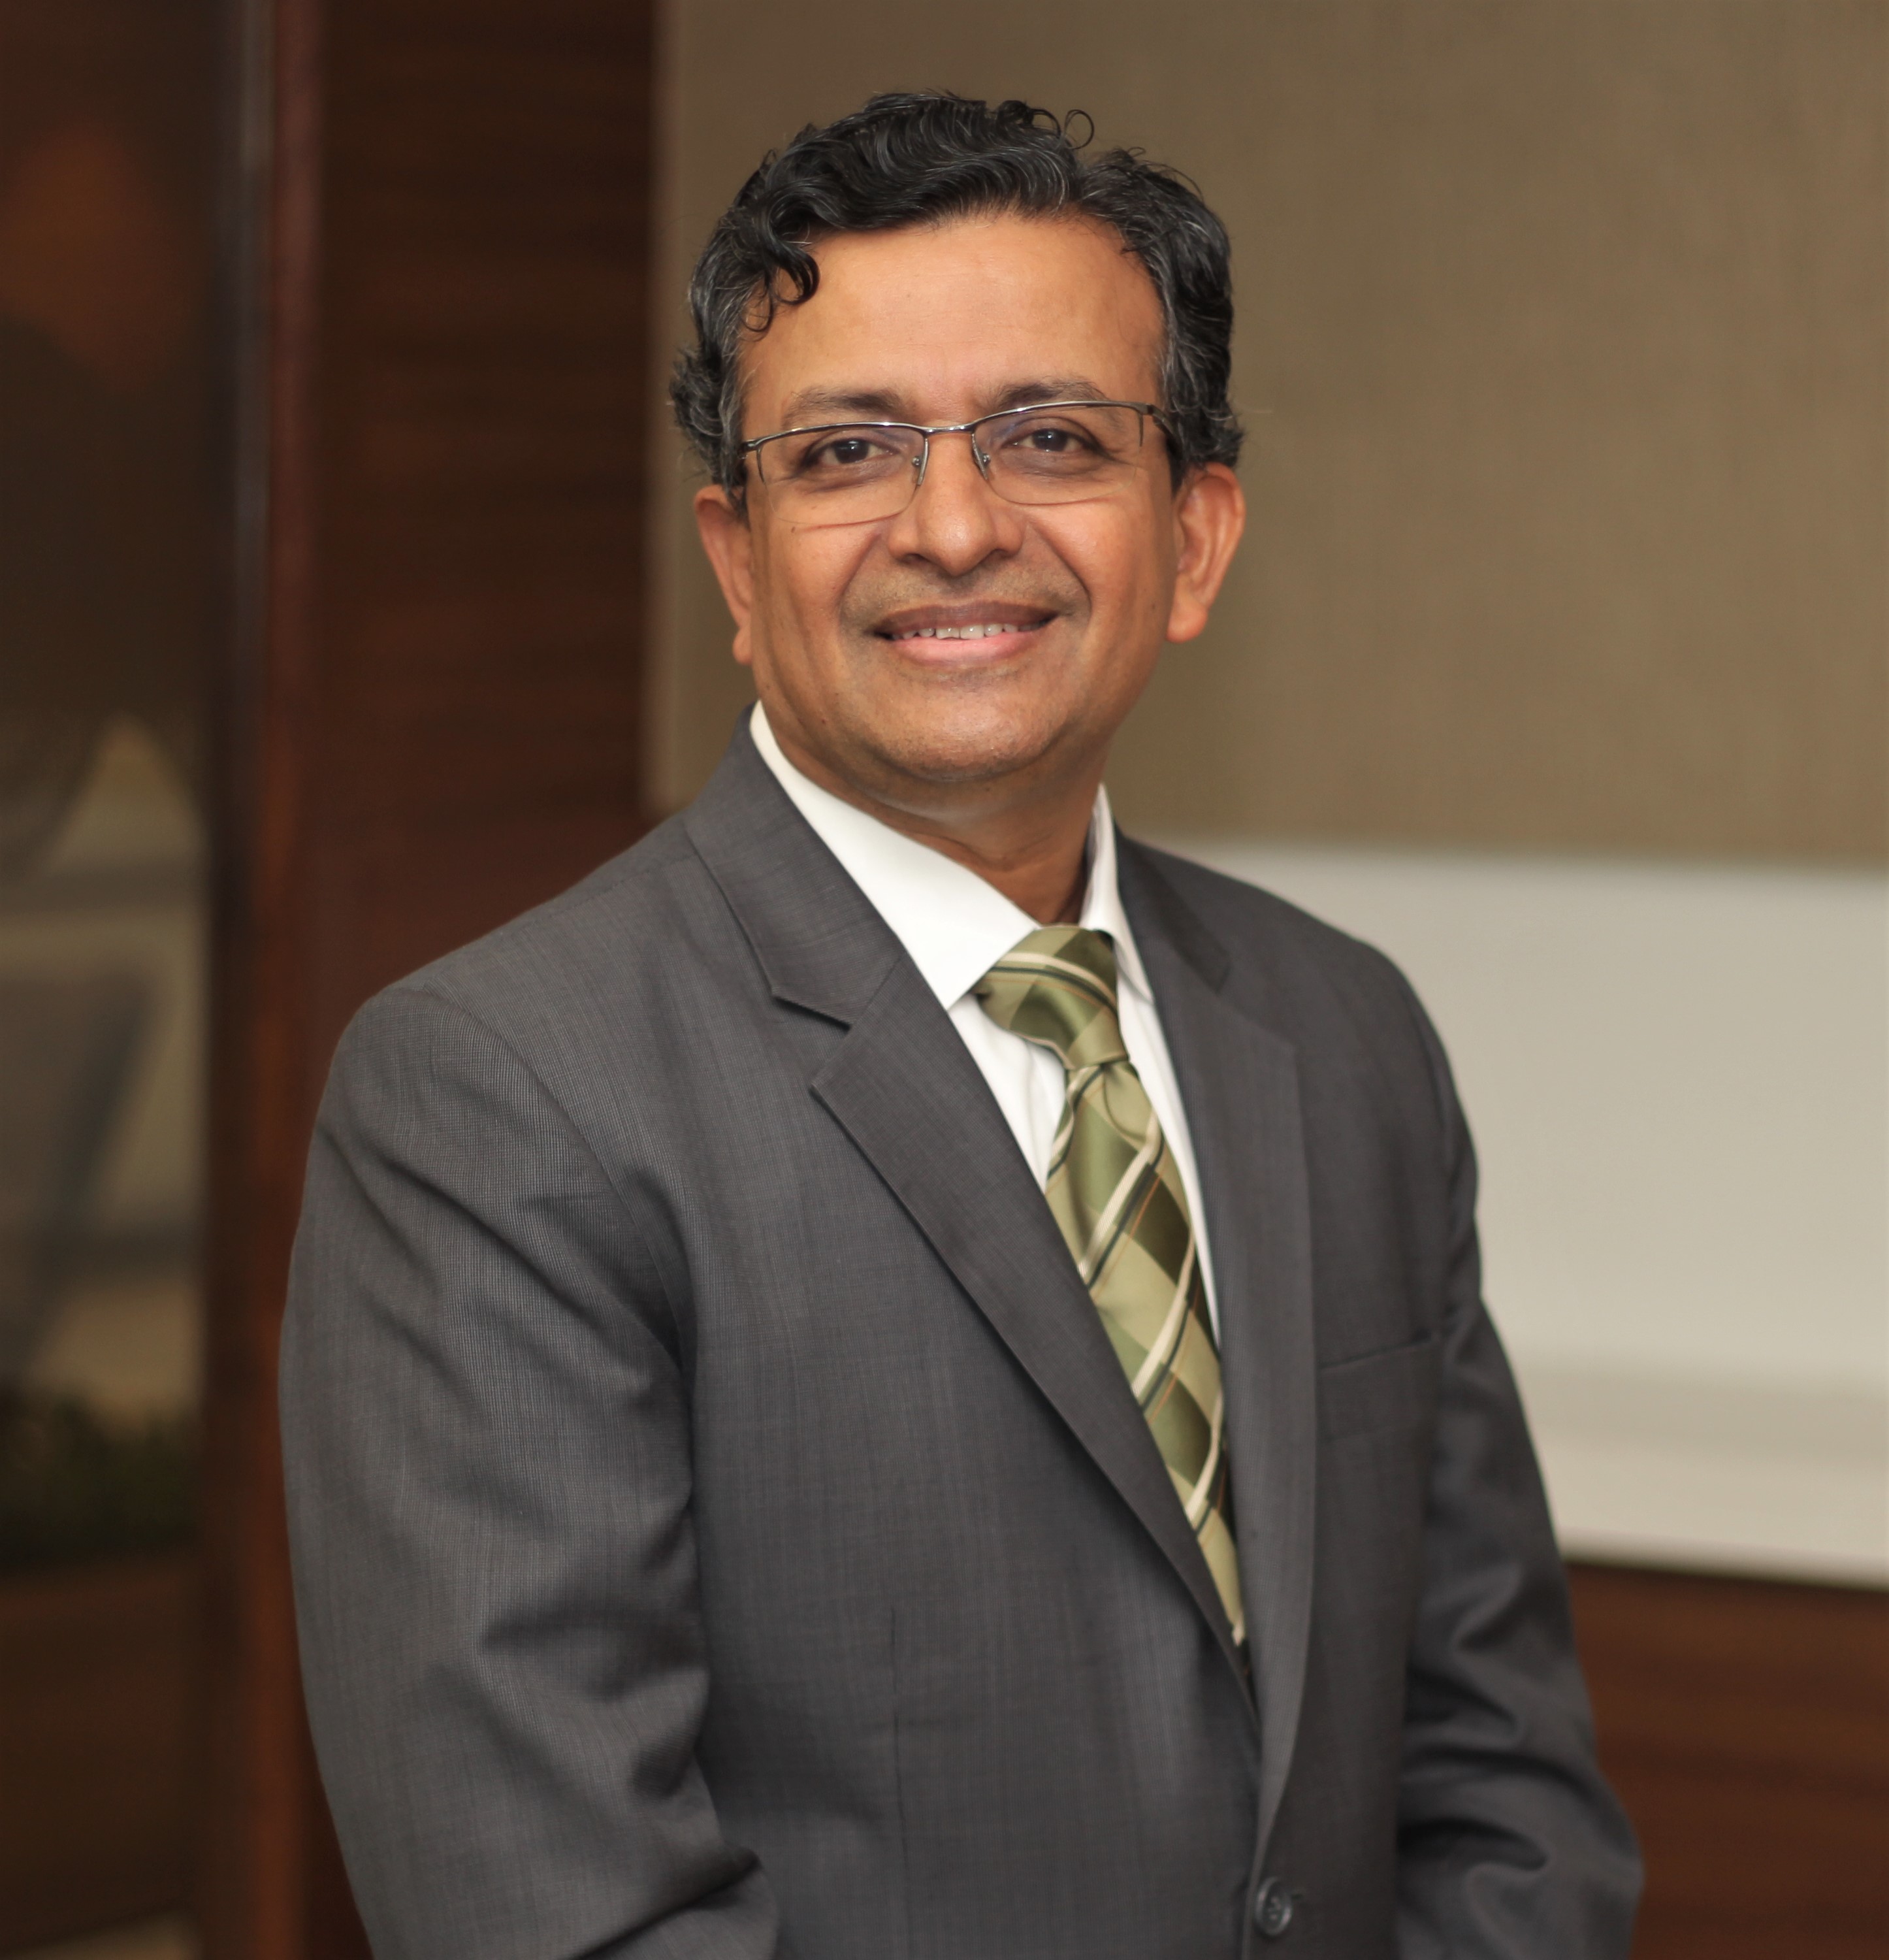 SV Nathan, <span>Partner and Chief Talent Officer, Deloitte India</span>